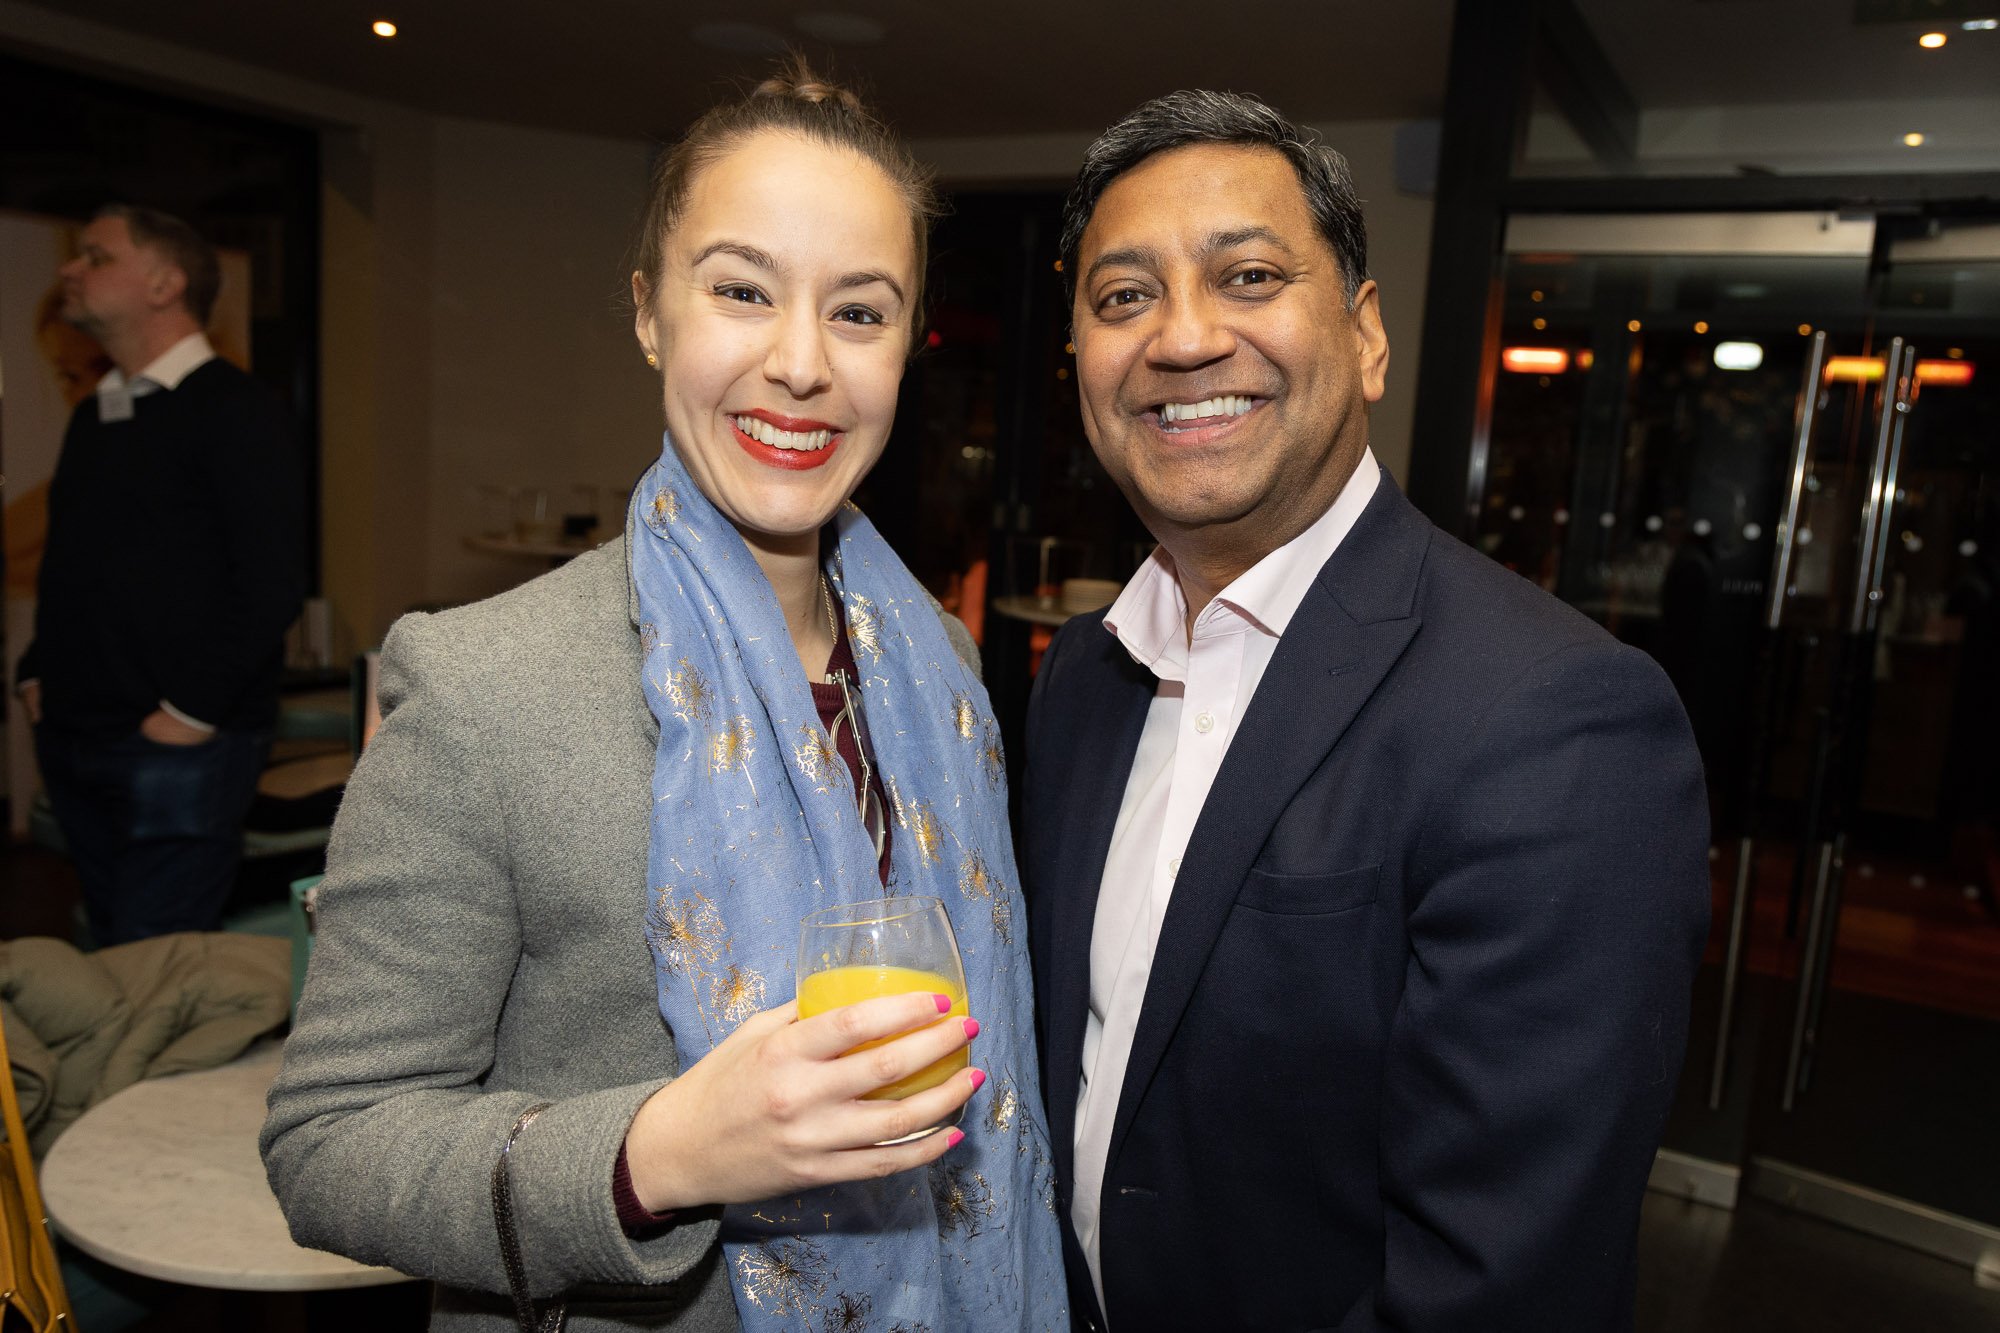 Business networking meeting hosted by Glossy Magazine at Piccolino Restaurant Hale Manchester-4.jpg